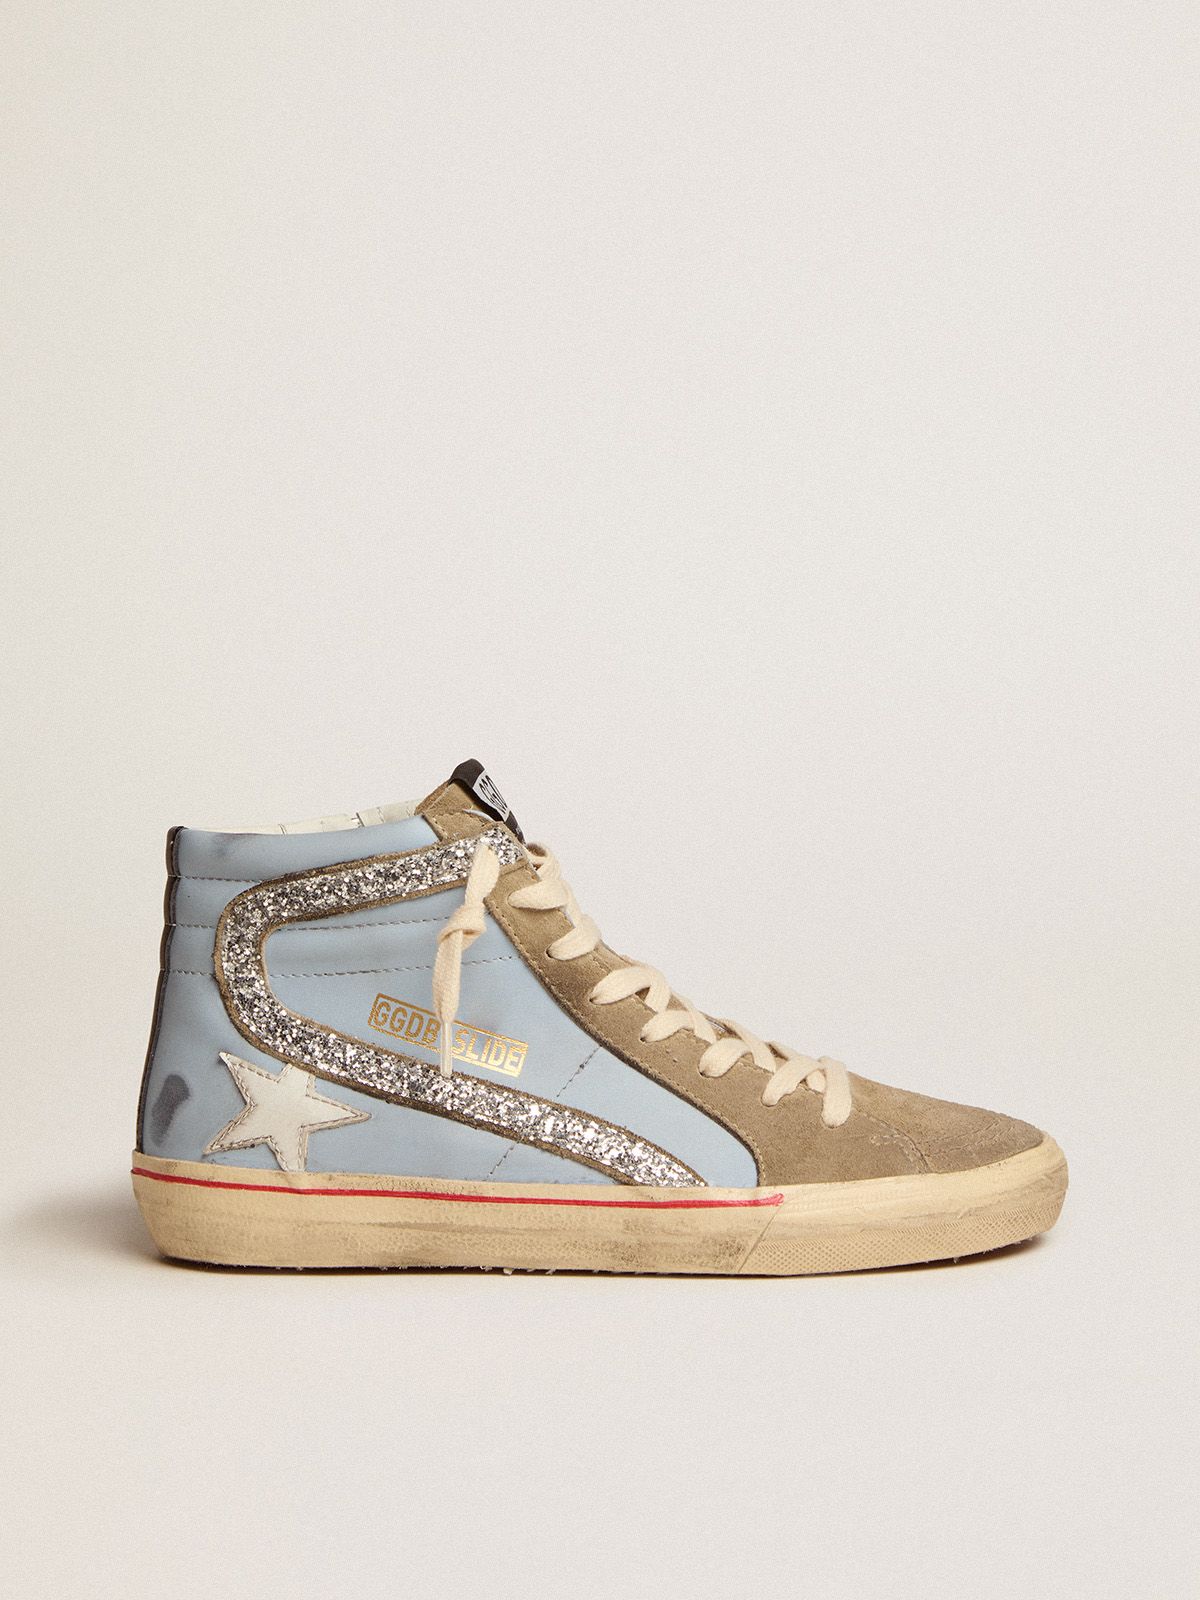 golden goose sneakers powder-blue and in with tongue dove-gray flash Slide glitter leather silver suede